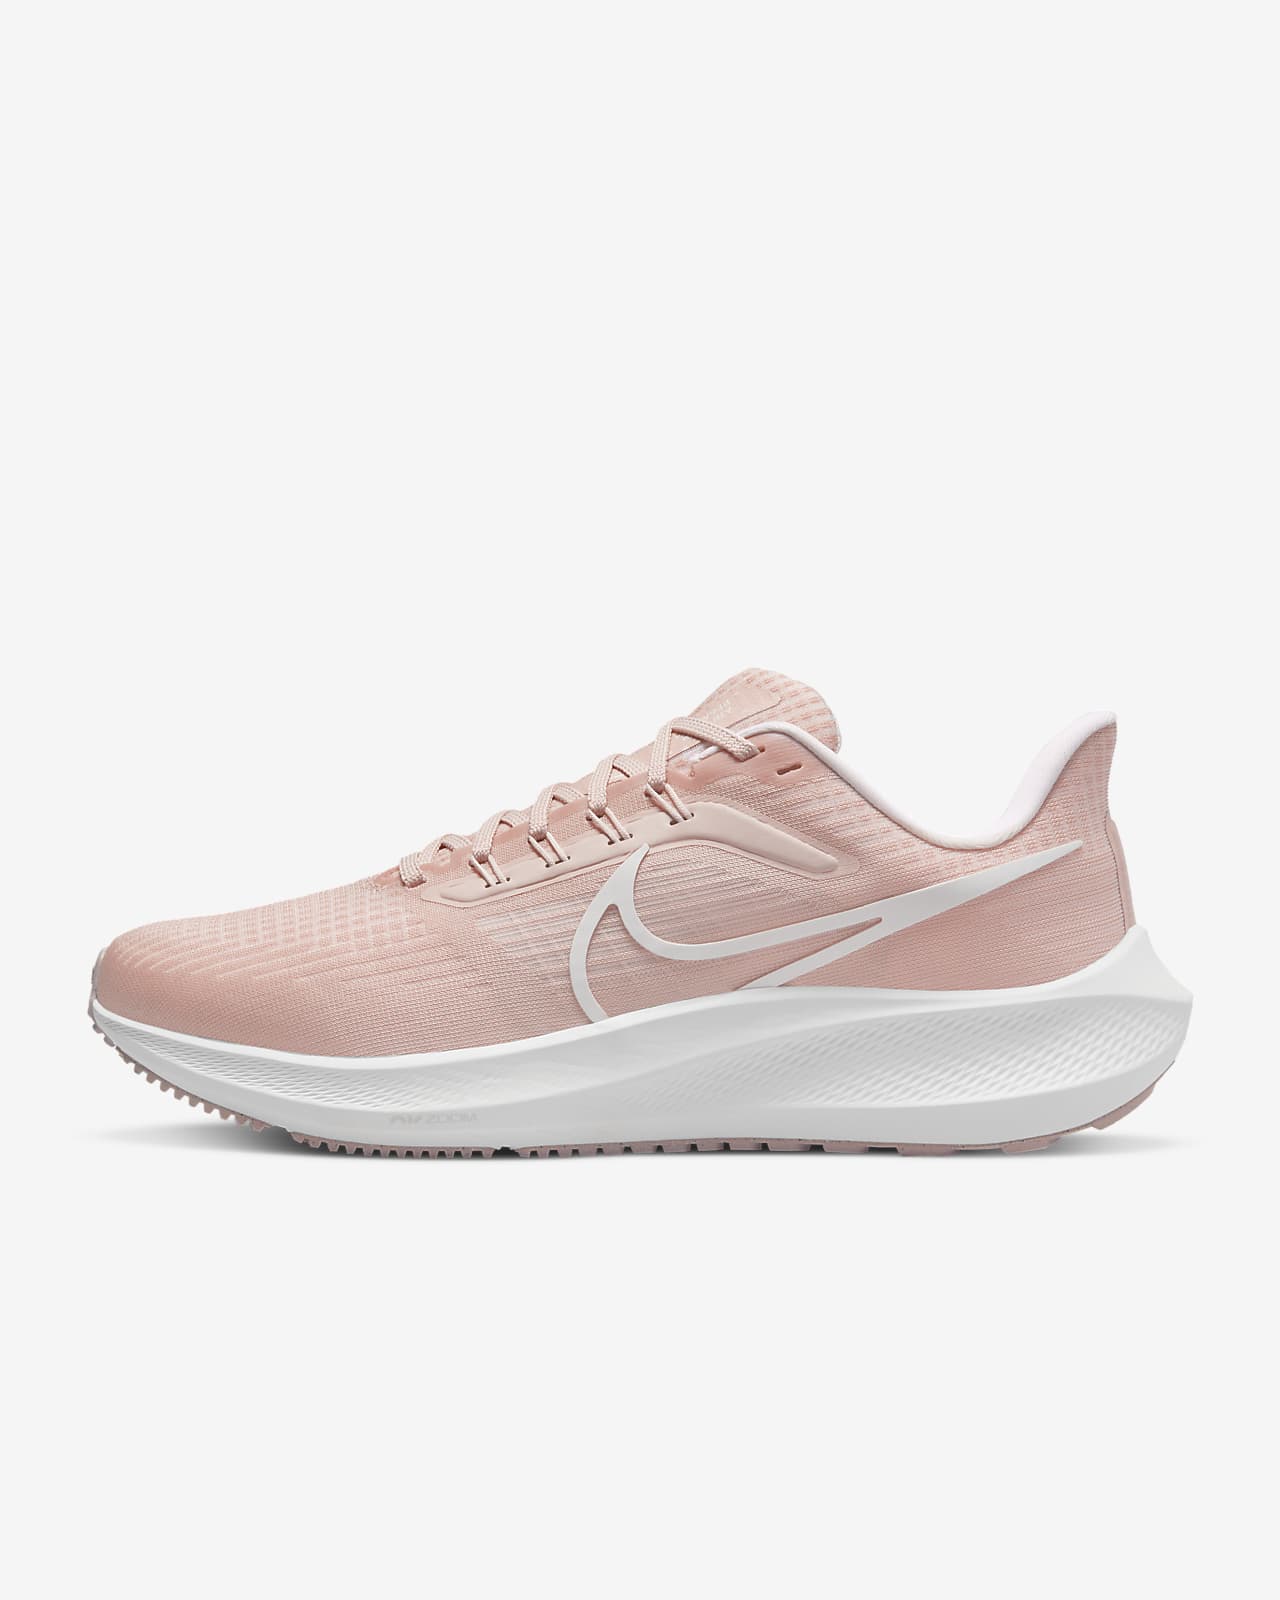 Chaussure running sur route Nike 39 pour femme. Nike